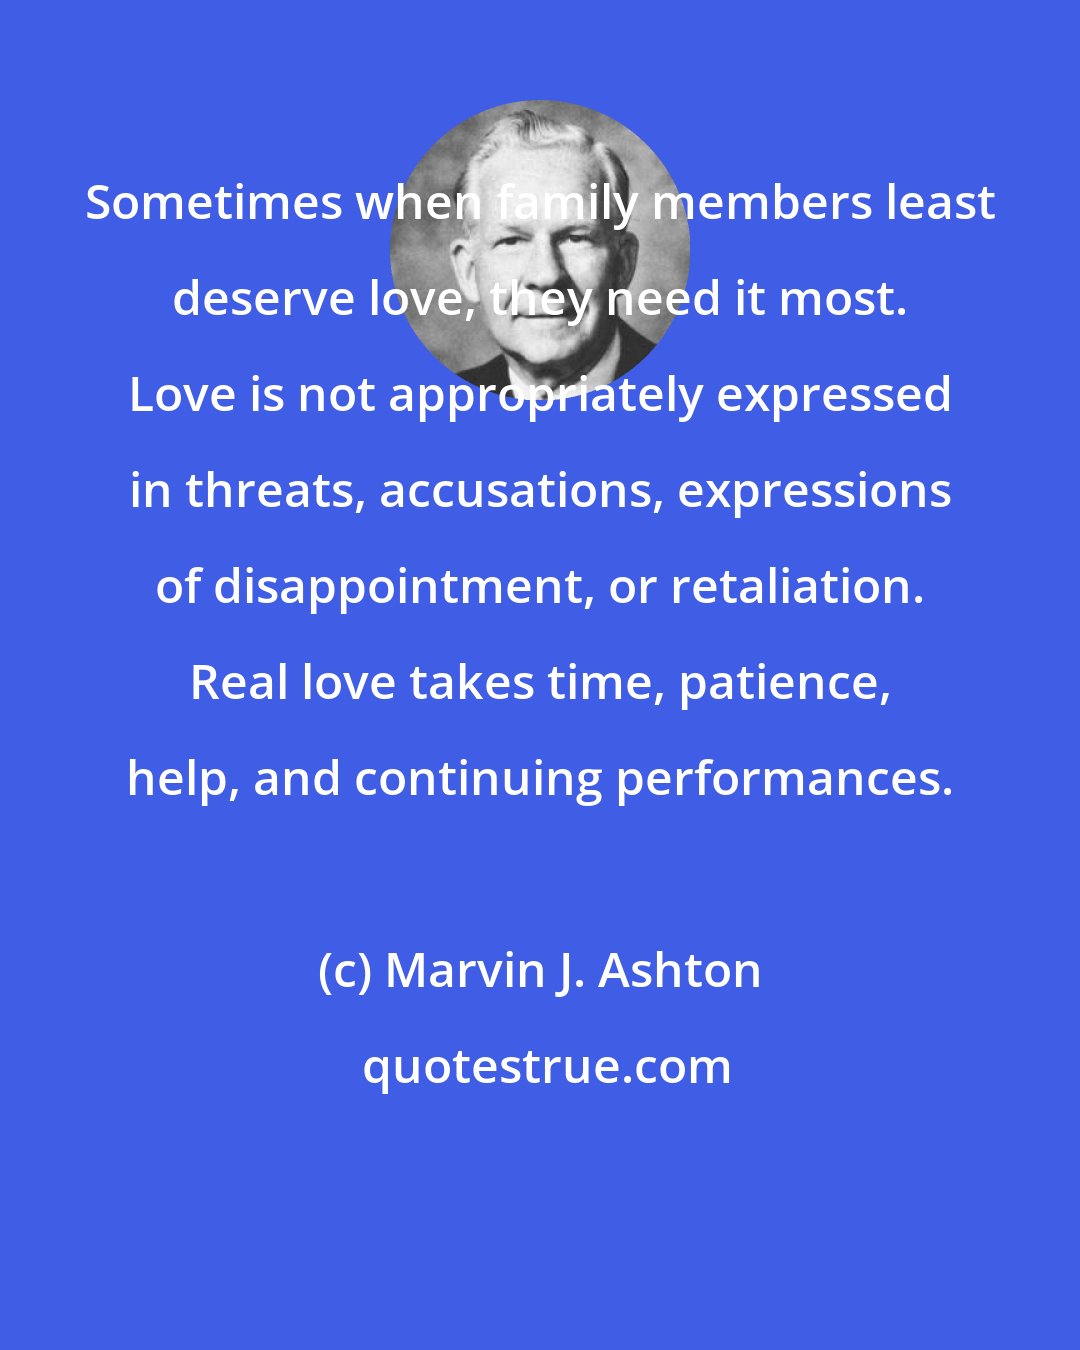 Marvin J. Ashton: Sometimes when family members least deserve love, they need it most. Love is not appropriately expressed in threats, accusations, expressions of disappointment, or retaliation. Real love takes time, patience, help, and continuing performances.